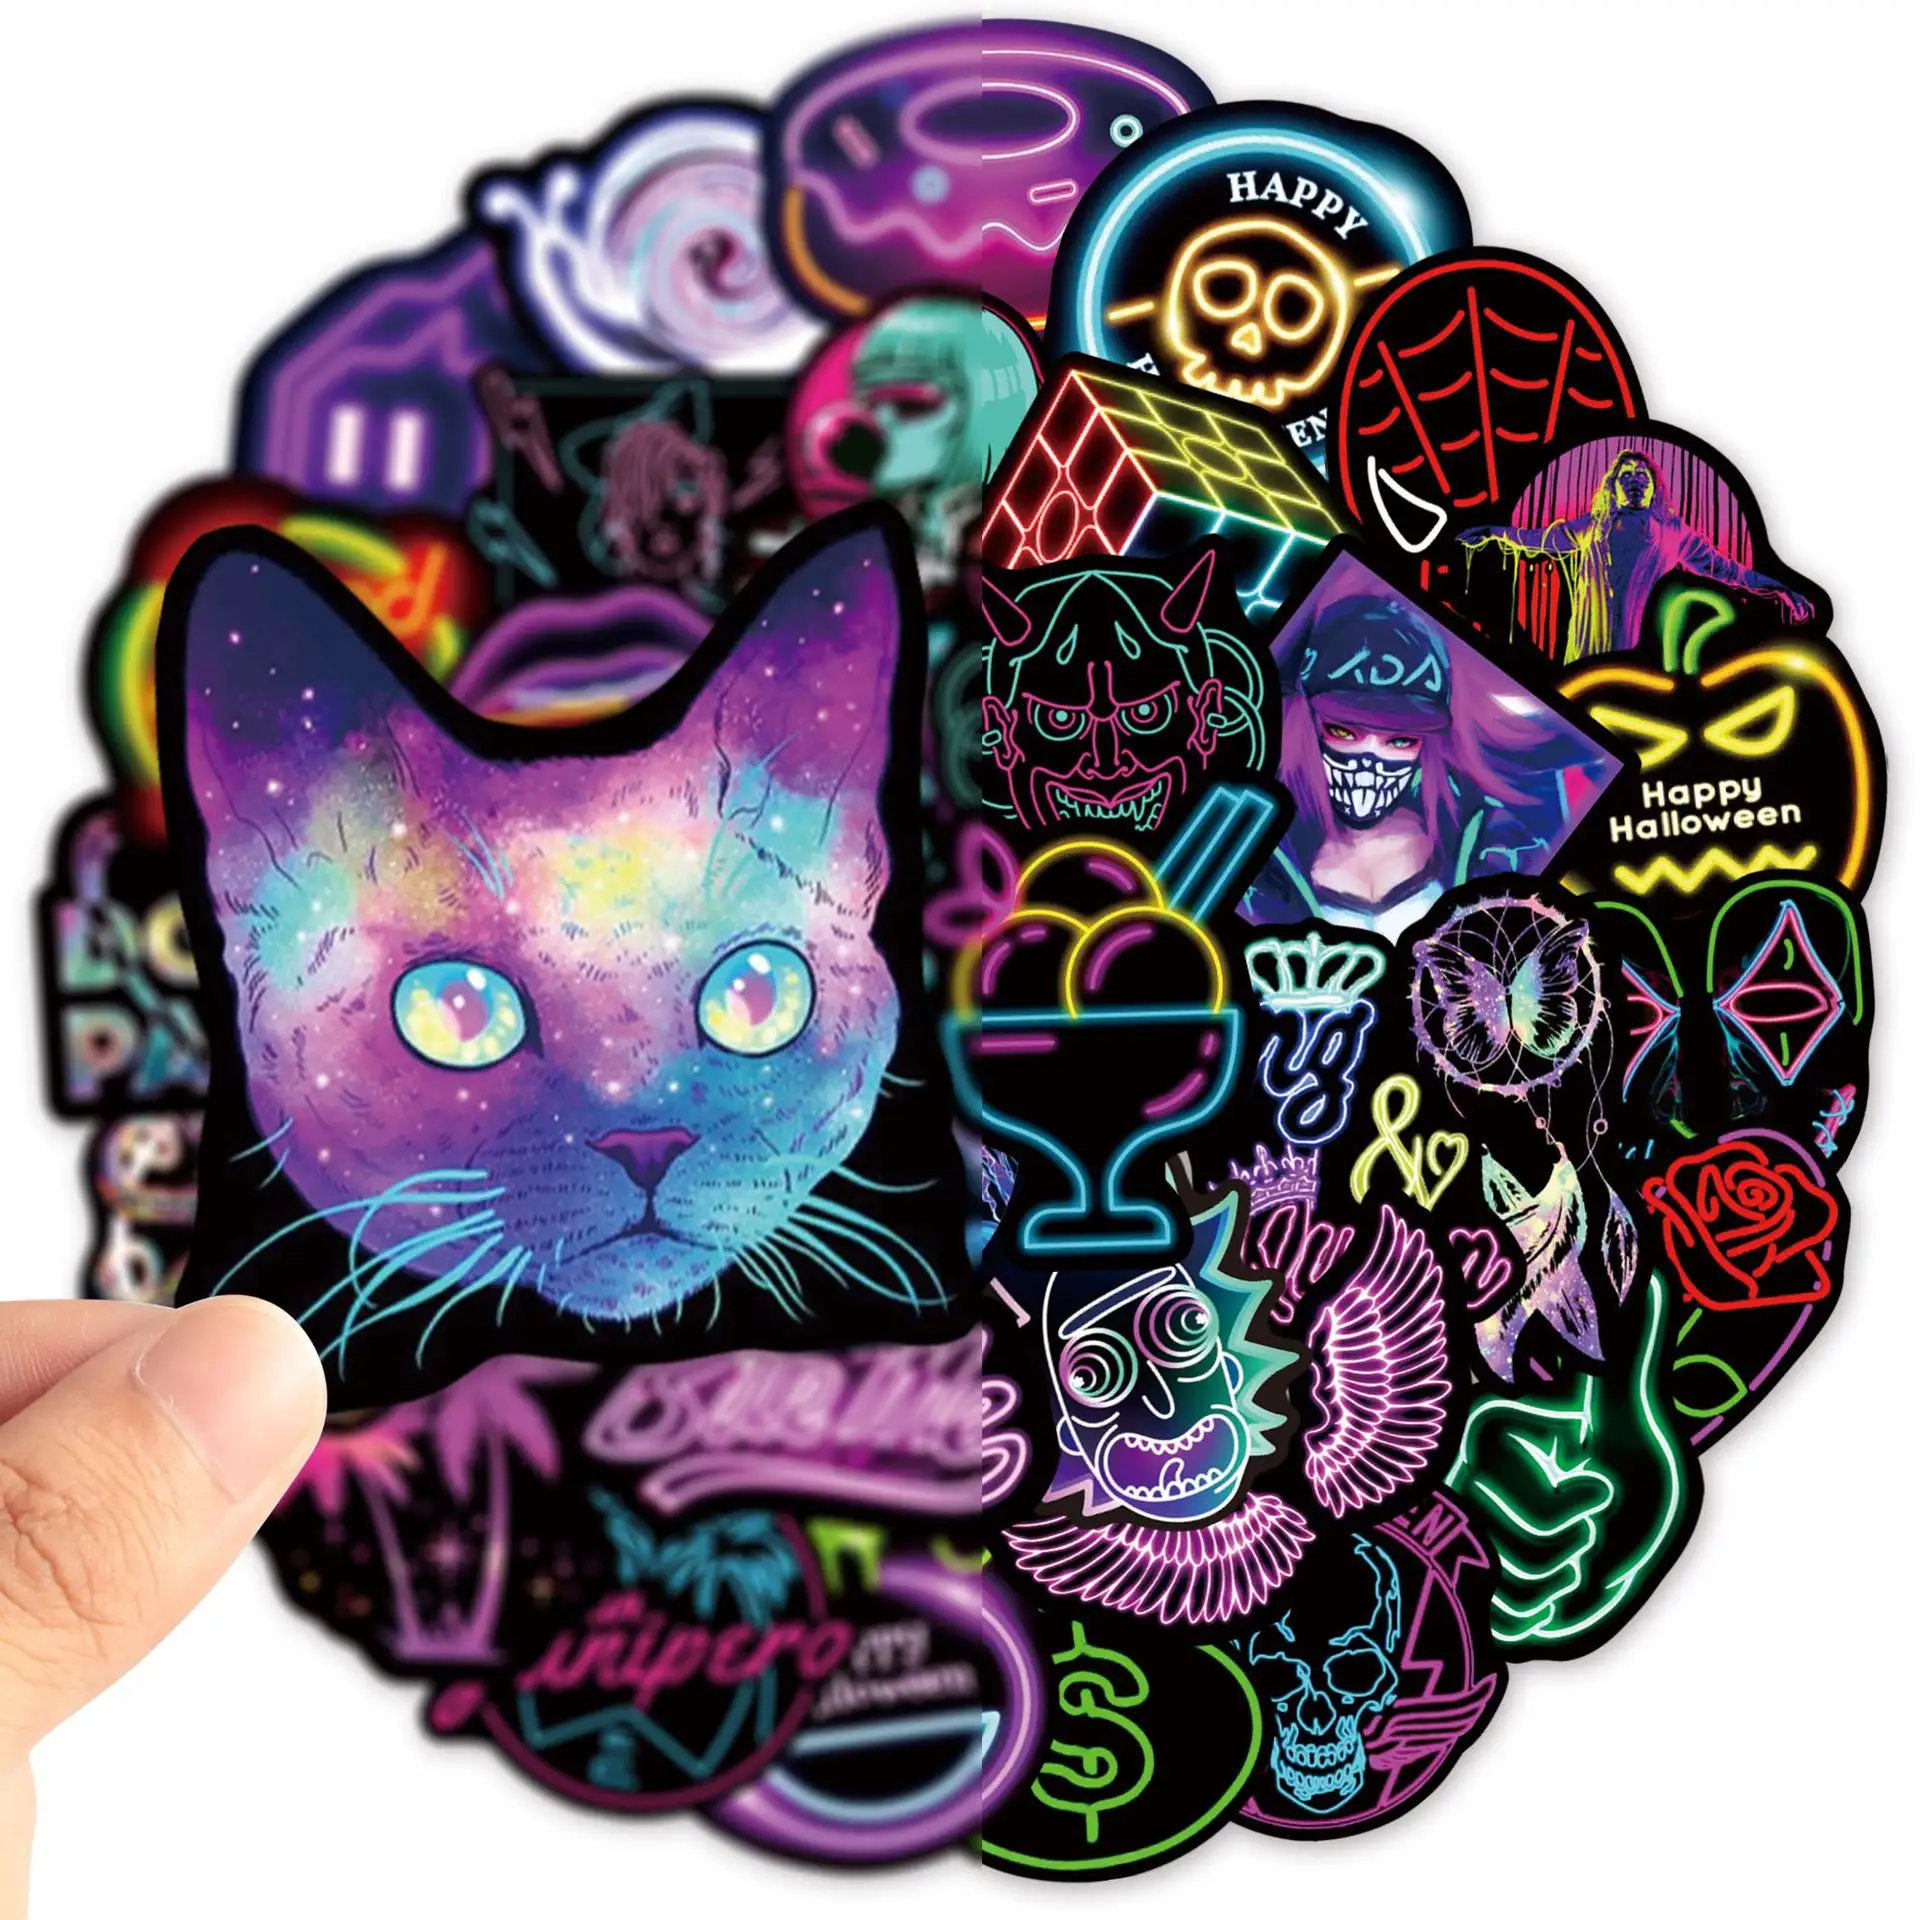 50pcs/bag Colorful Neon Stickers Cute Waterproof Laptop Computer Skateboard Bicycle Luggage For Teen Kids Toys Sticker